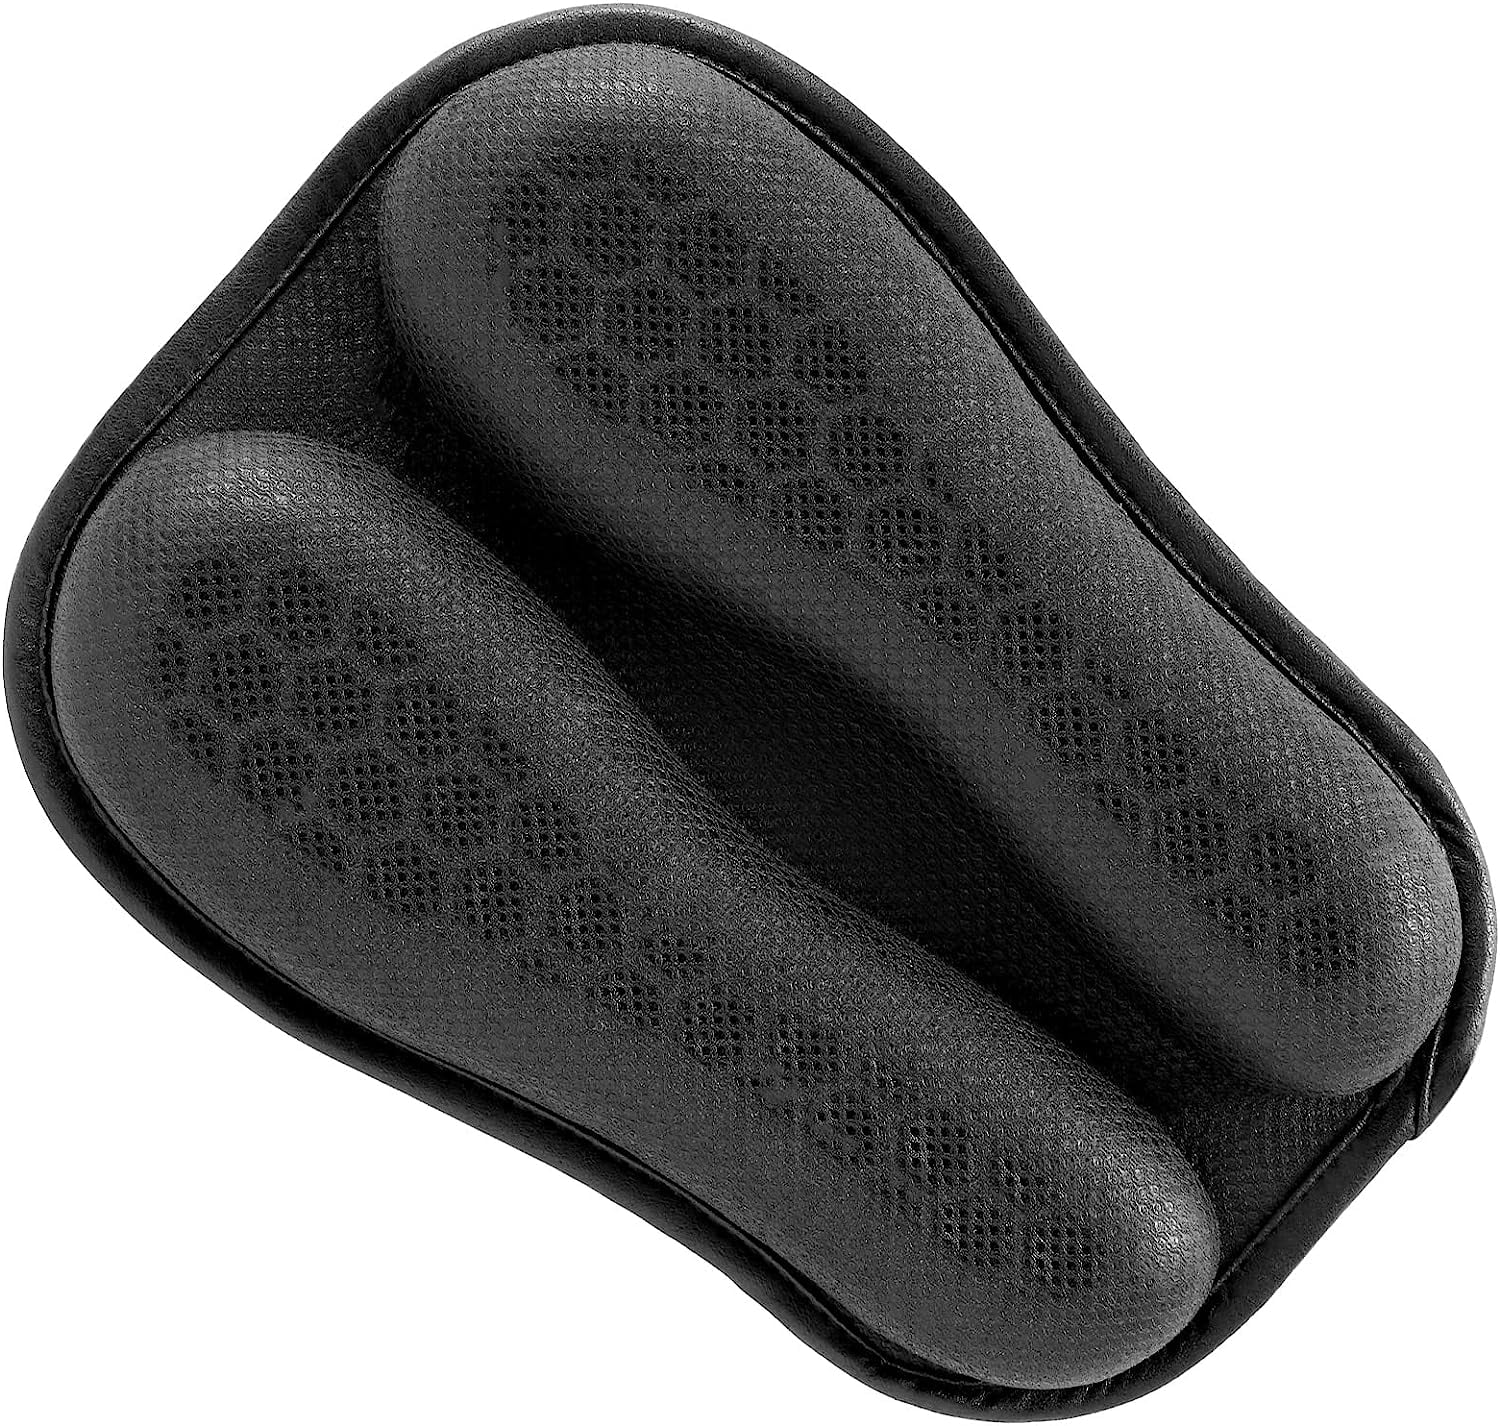 Motorcycle Seat Cushion Pad 3d Honeycomb High Elasticity Gel Material  Comfortable Breathable Shock Absorption